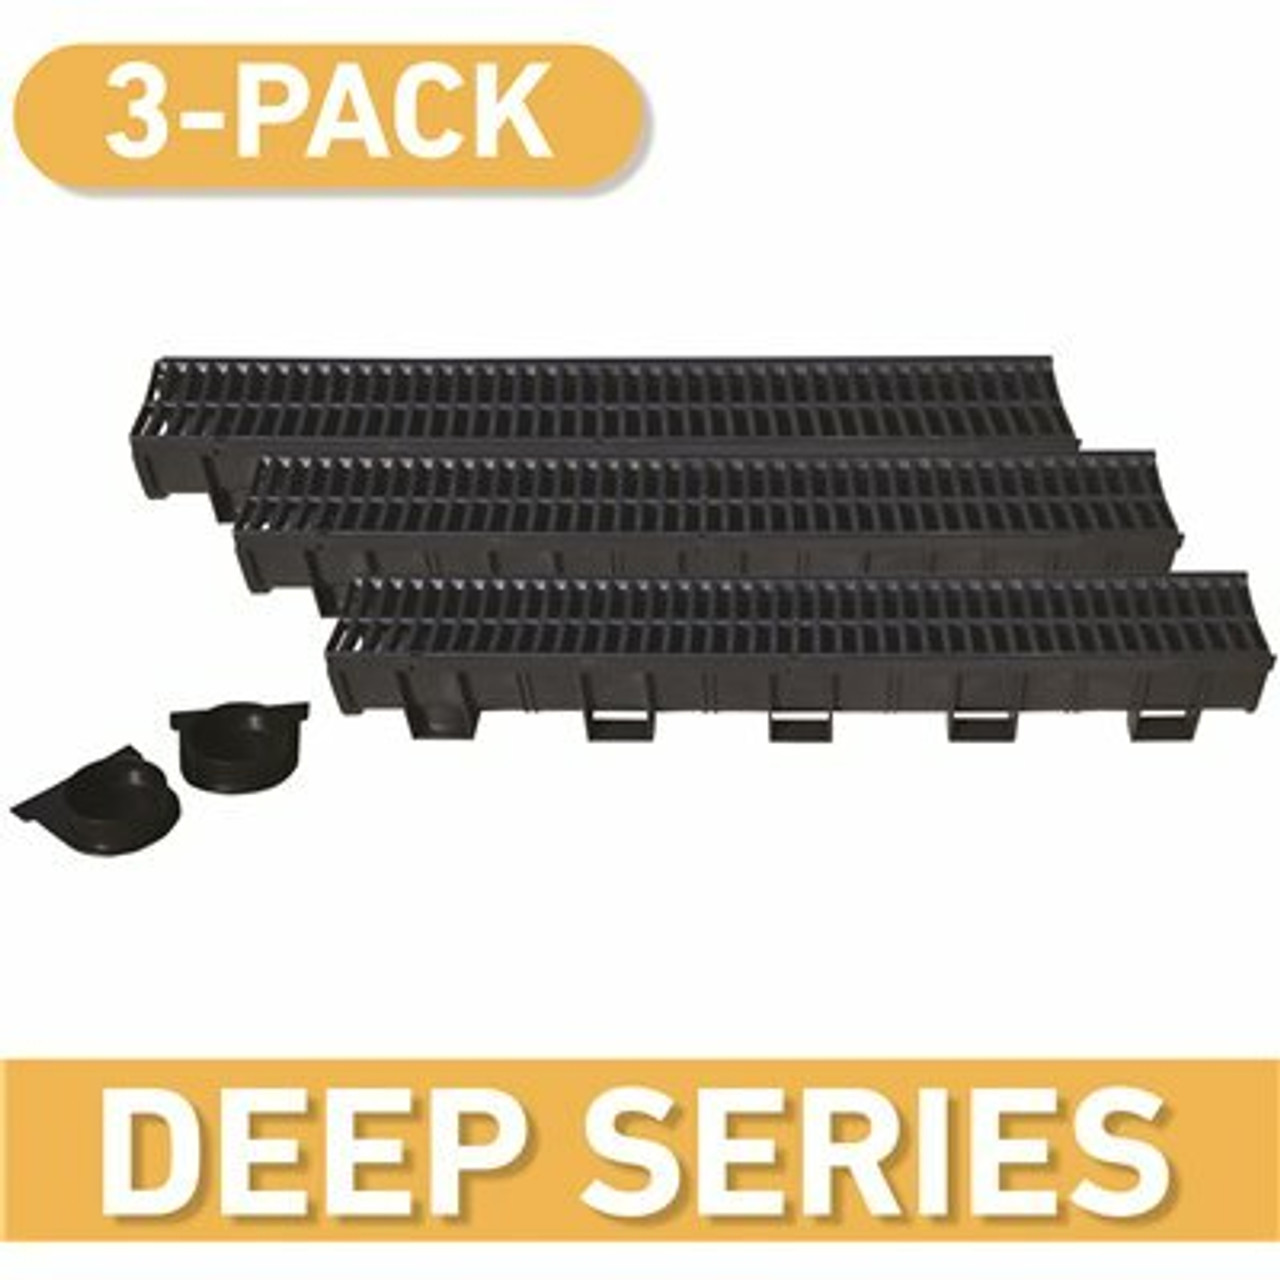 Deep Series 5.4 In. W X 5.4 In. D X 39.4 In. L Trench And Channel Drain Kit With Black Grate (3-Pack | 9.8 Ft)